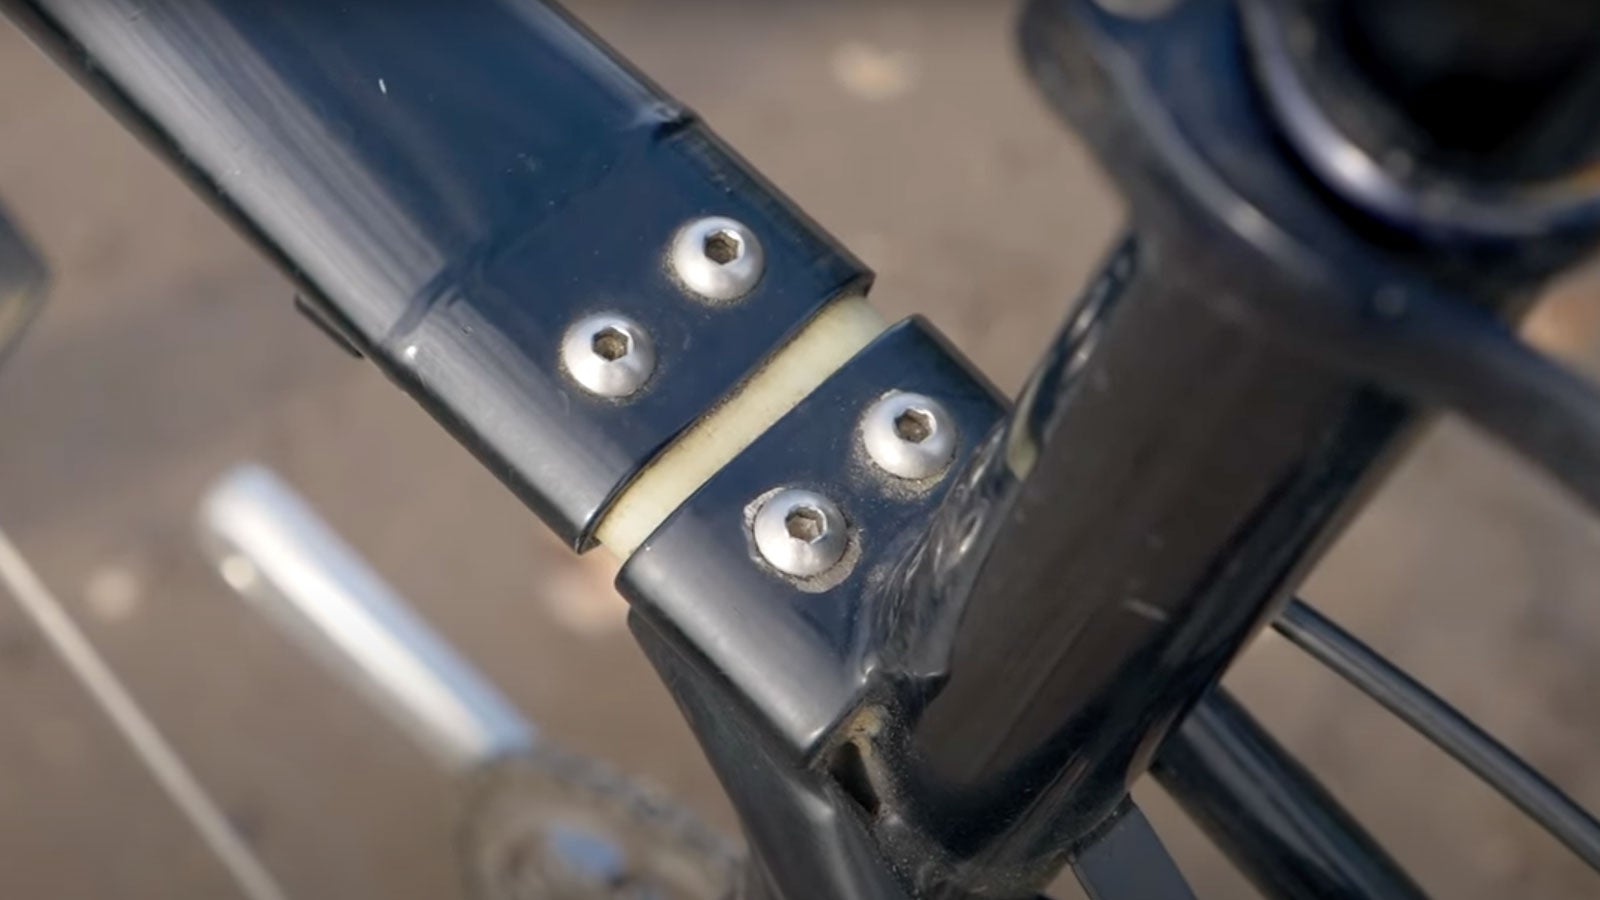 This Wild 1990s Mountain Bike Is Held Together by Springs